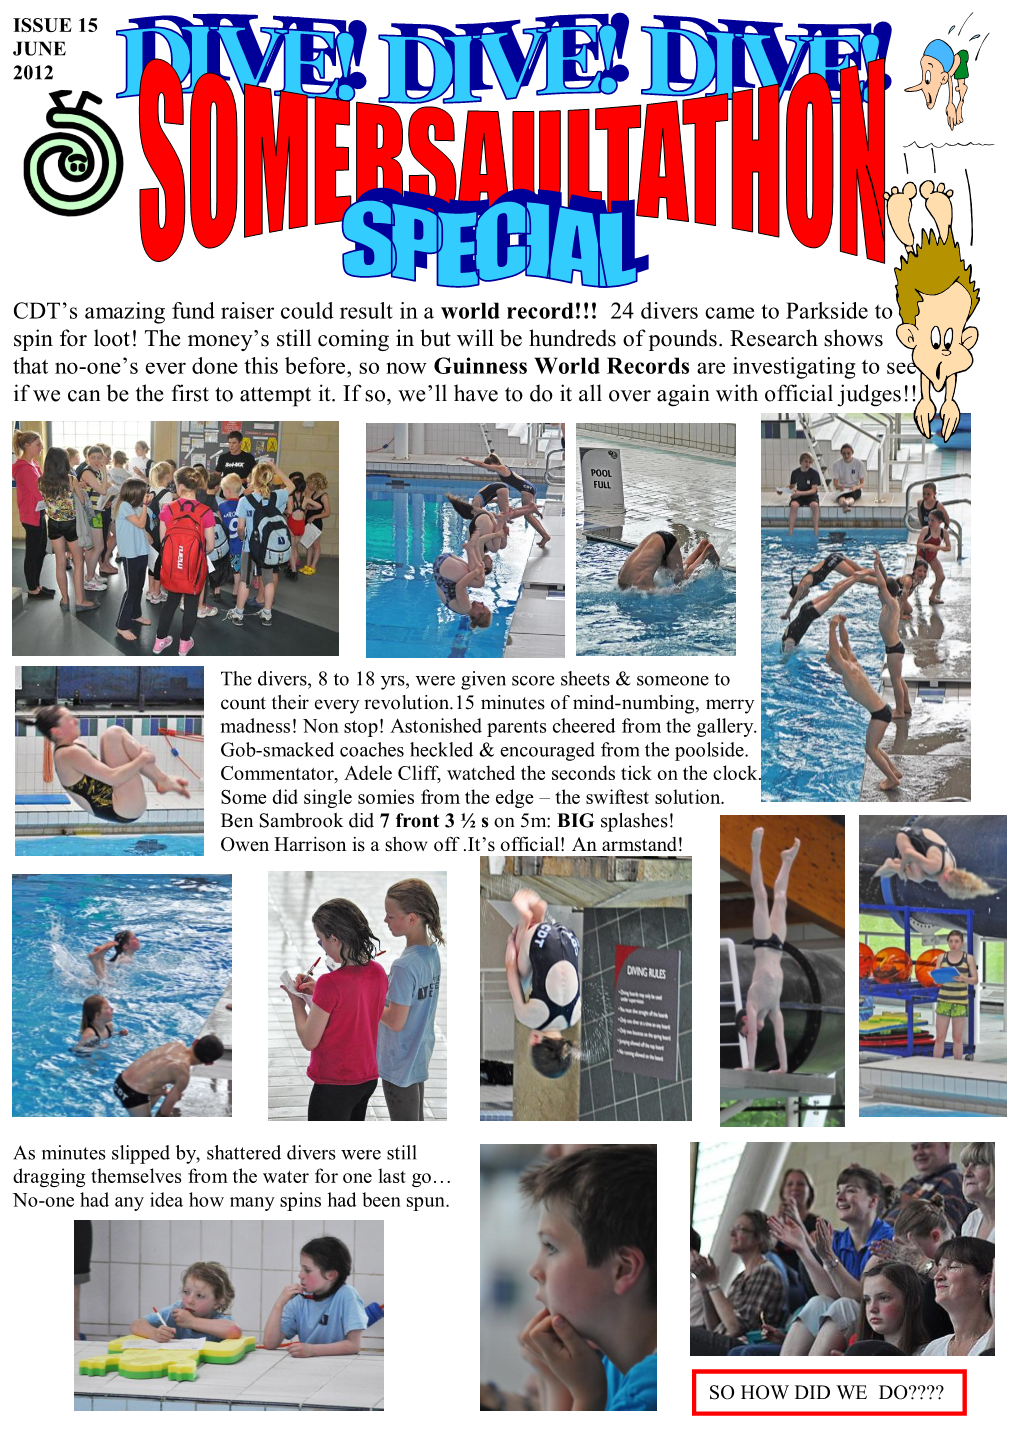 CDT's Amazing Fund Raiser Could Result in a World Record!!! 24 Divers